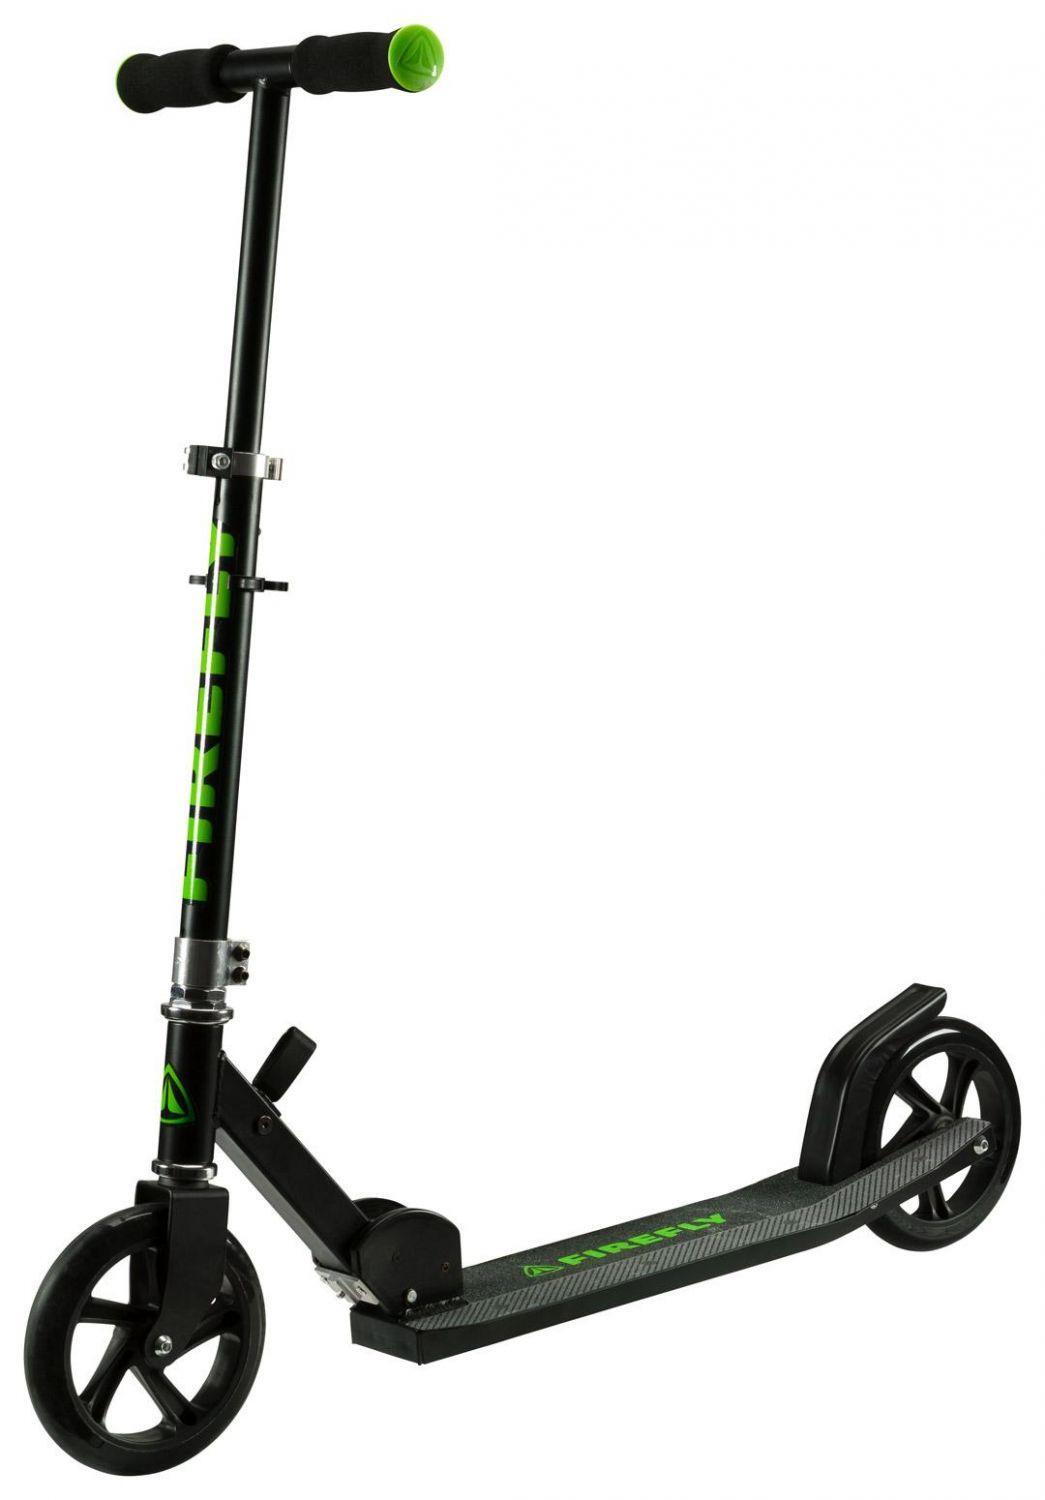 Firefly A180.1 Scooter